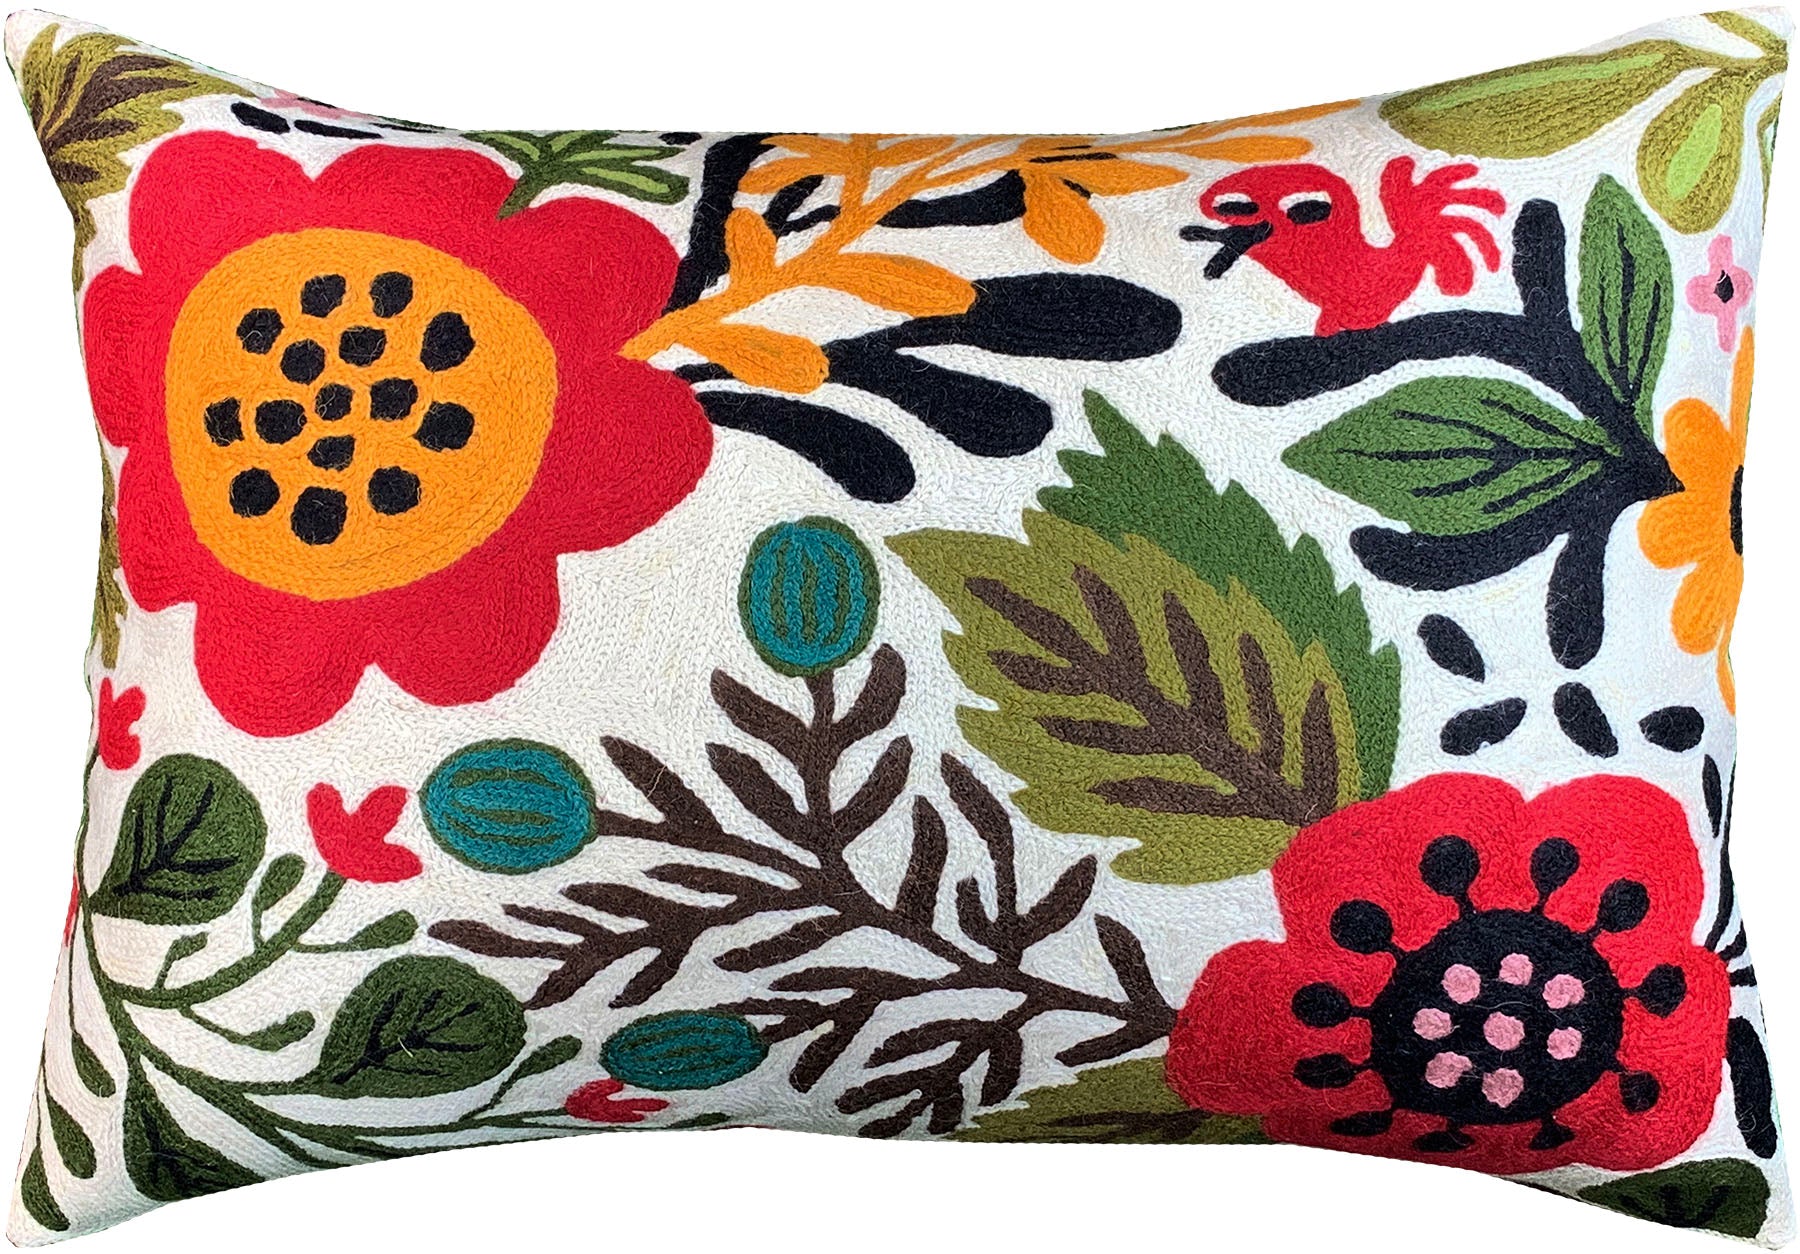 Boho Pillows |Hand Embroidered Cushions Wool Size Floral Outdoor Pillows |Suzani Cushions Kashmir Designs Yellow Floral Pillow Cover |Polish Flower Throw Pillows Floral Chair Cushion 14x20 